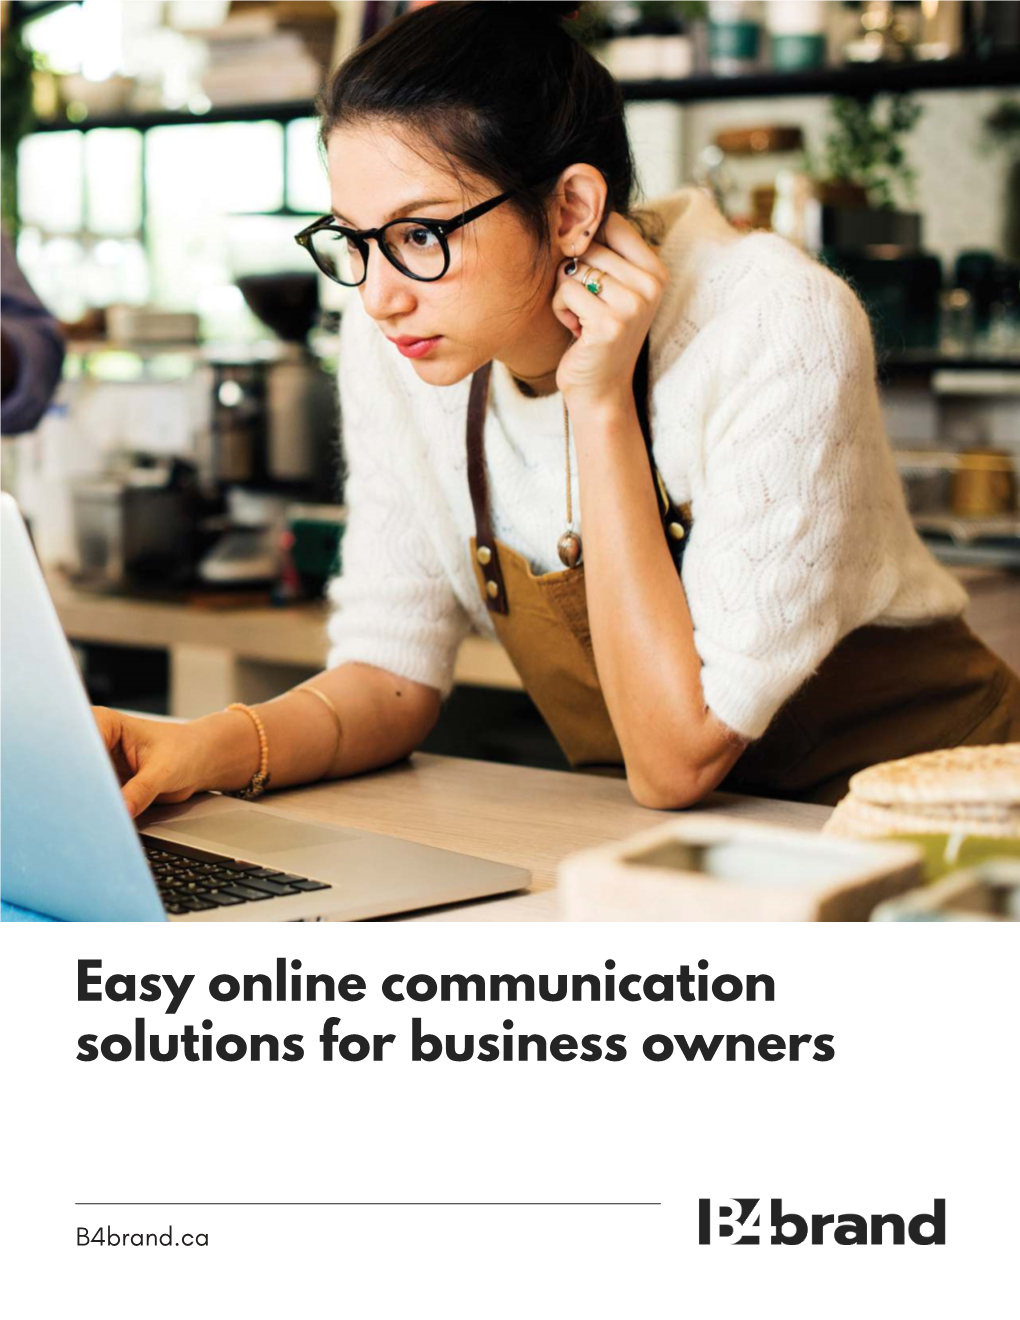 Easy Online Communication Solutions for Business Owners